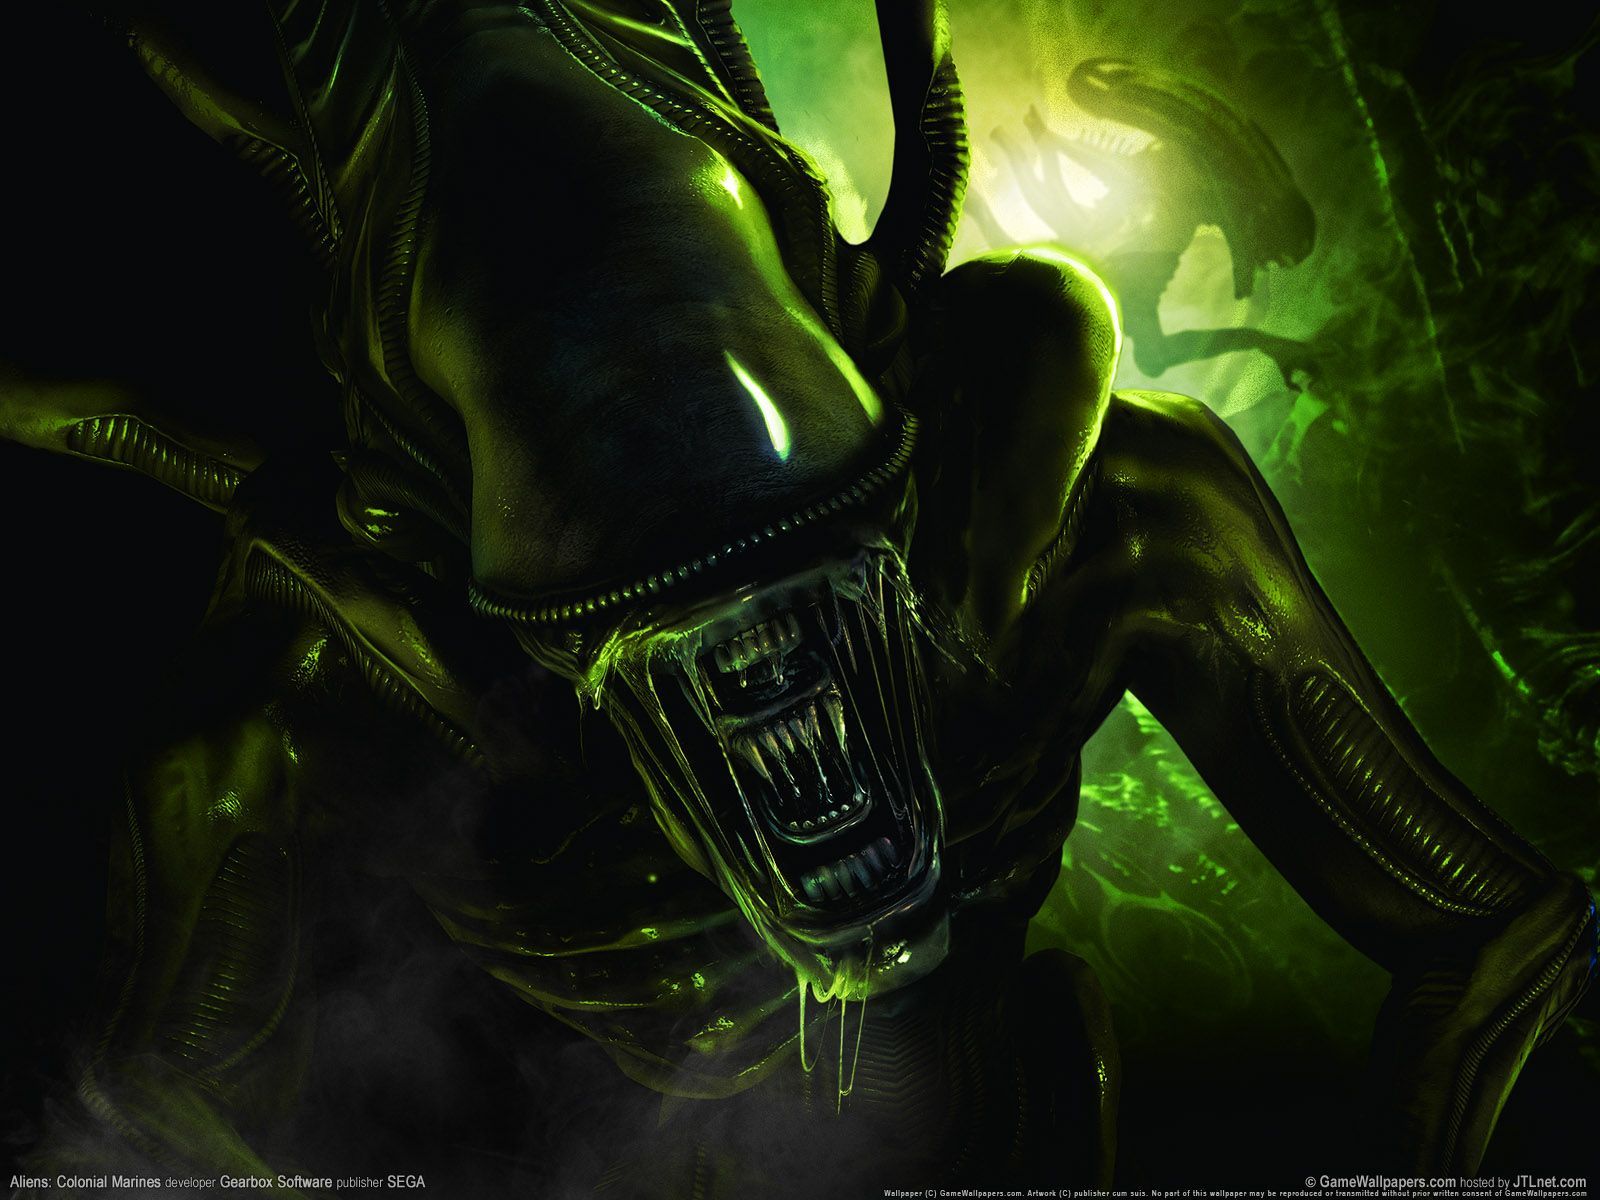 By wallpapervortex.com and it maybe a green alien and there is no date. Aliens colonial marines, Alien picture, Green movie